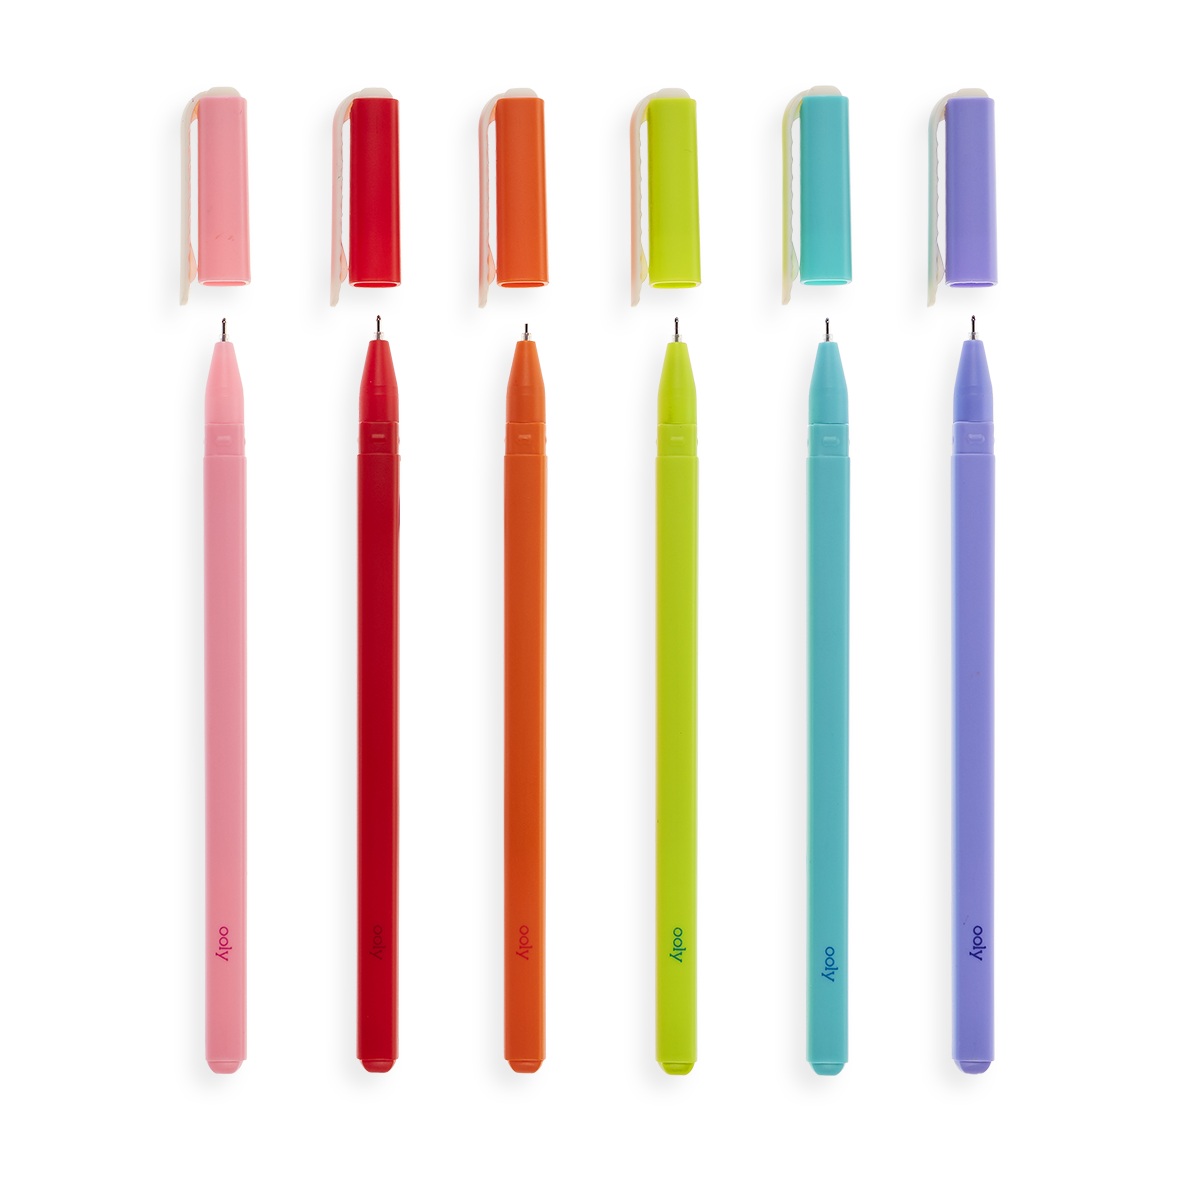 OOLY Fine Line Colored Gel Pens set of 6 out of packaging